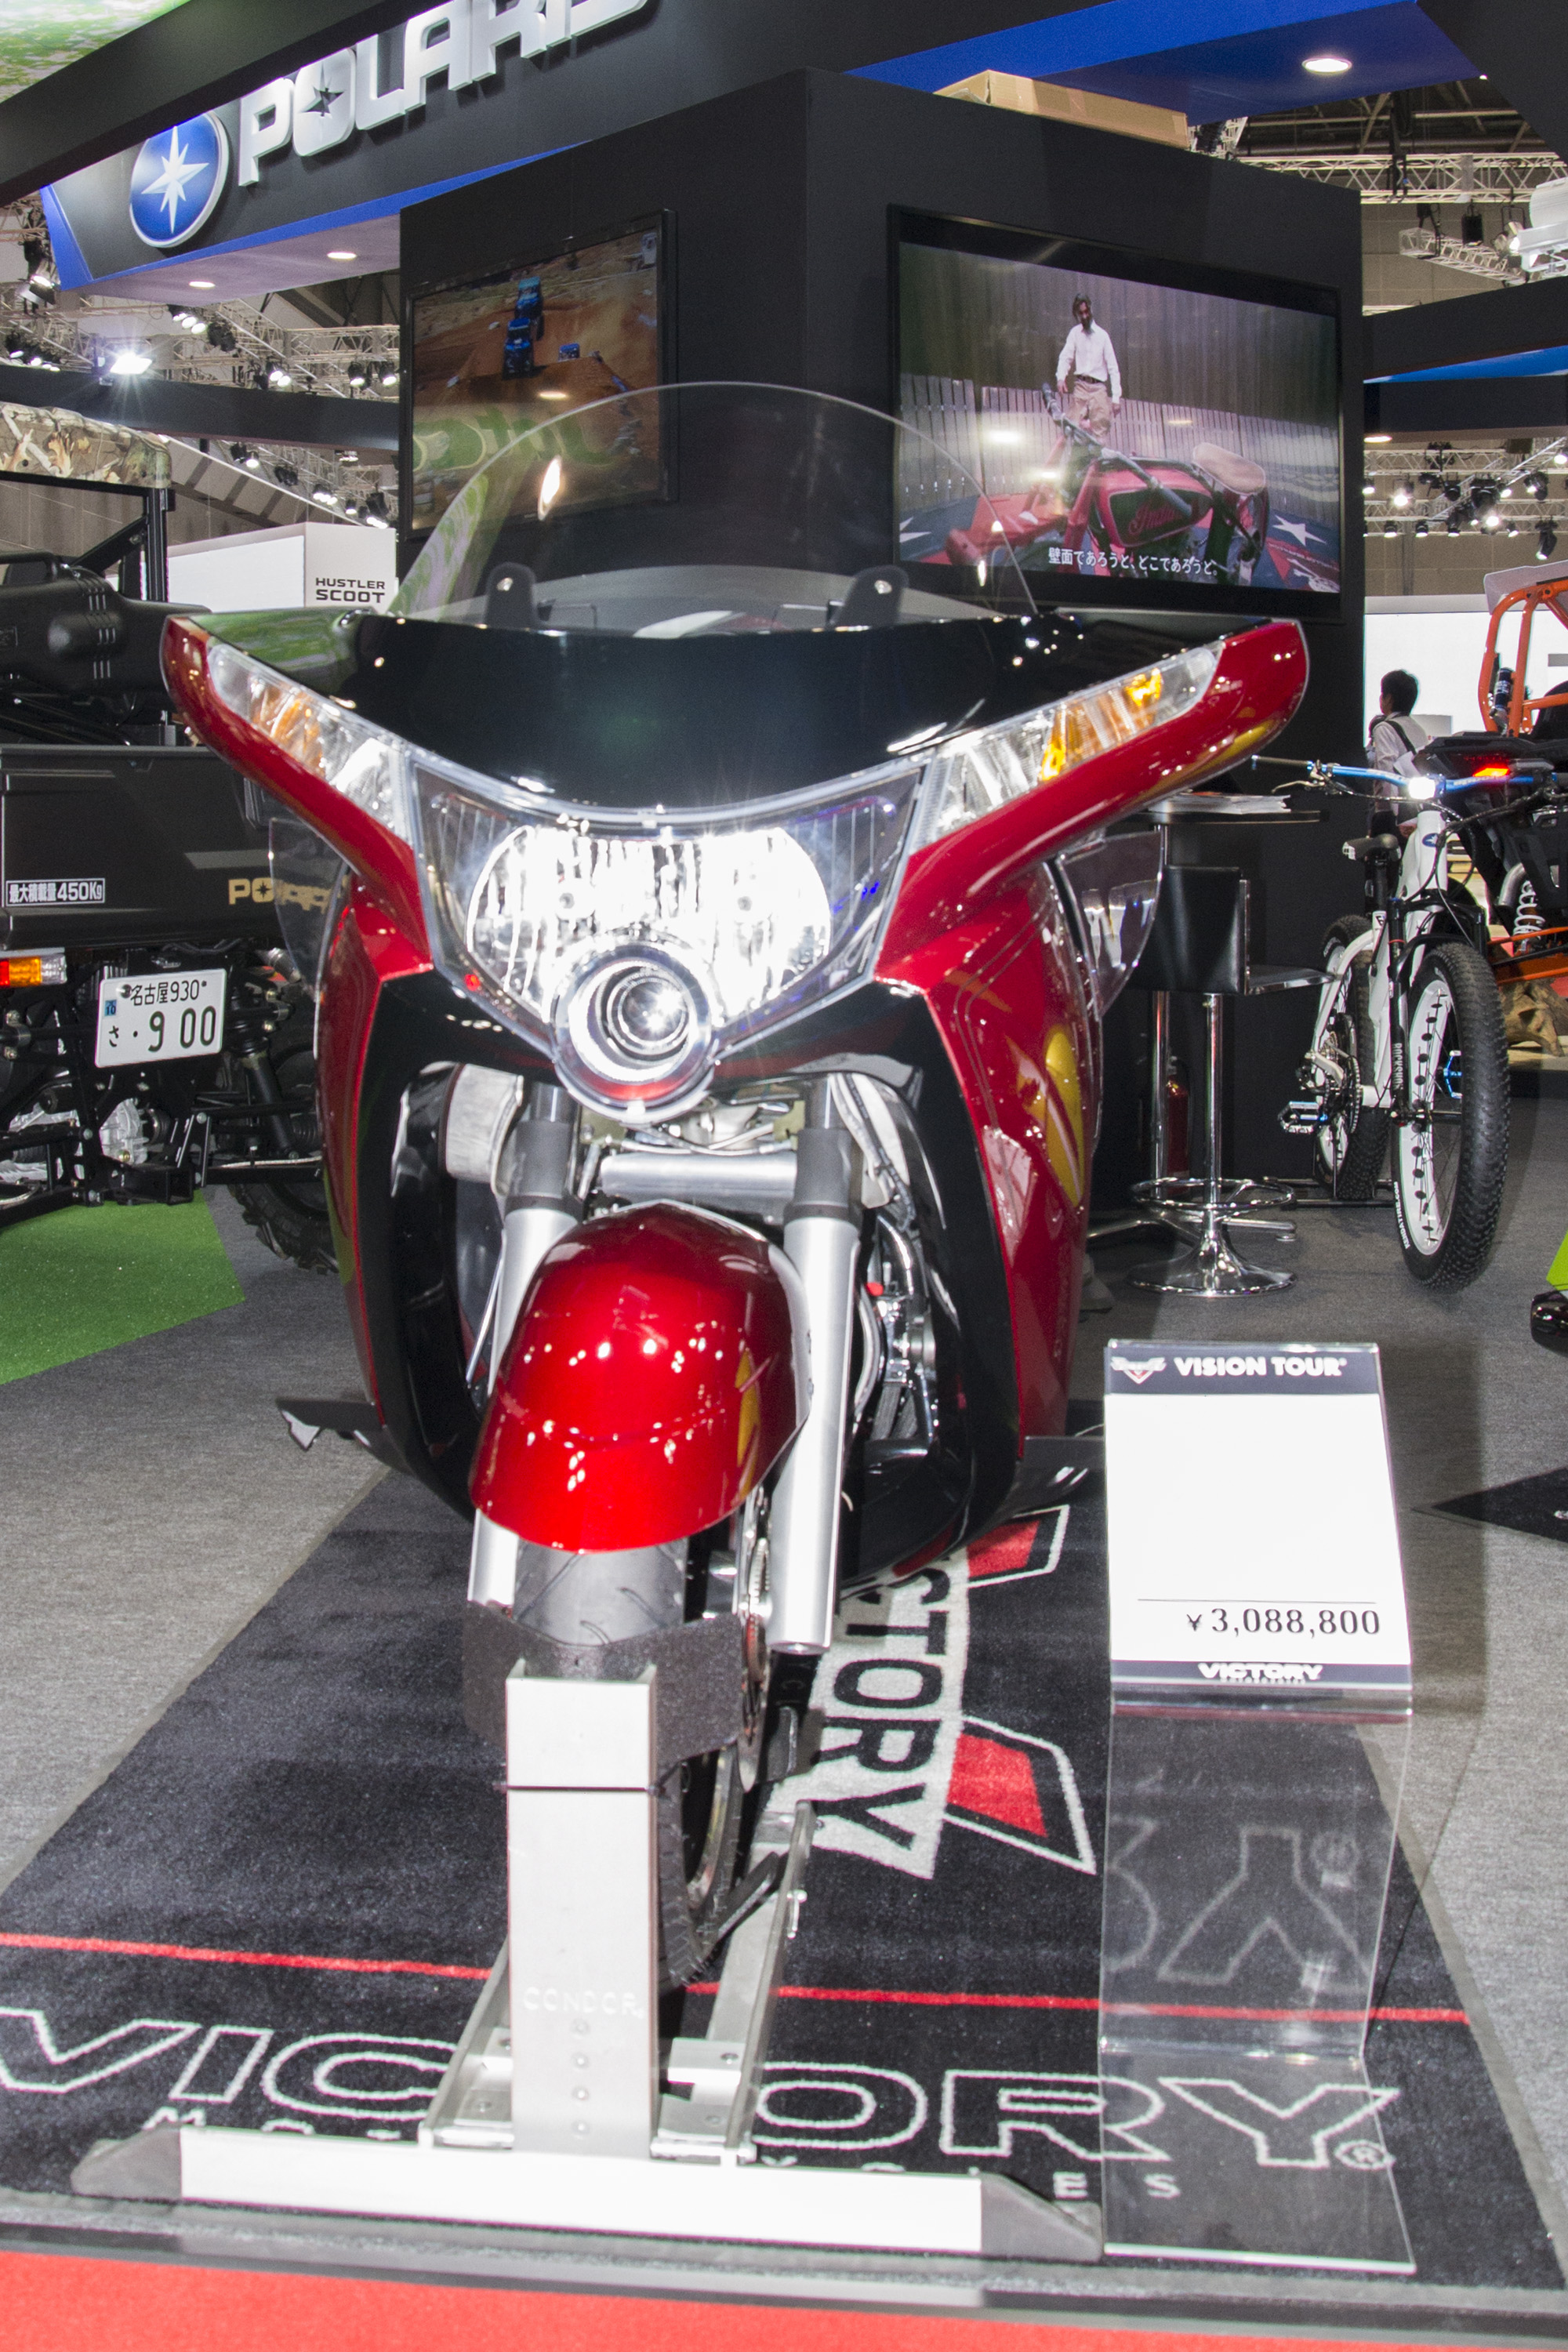 VisionTour(IndianMotorcycle)_02